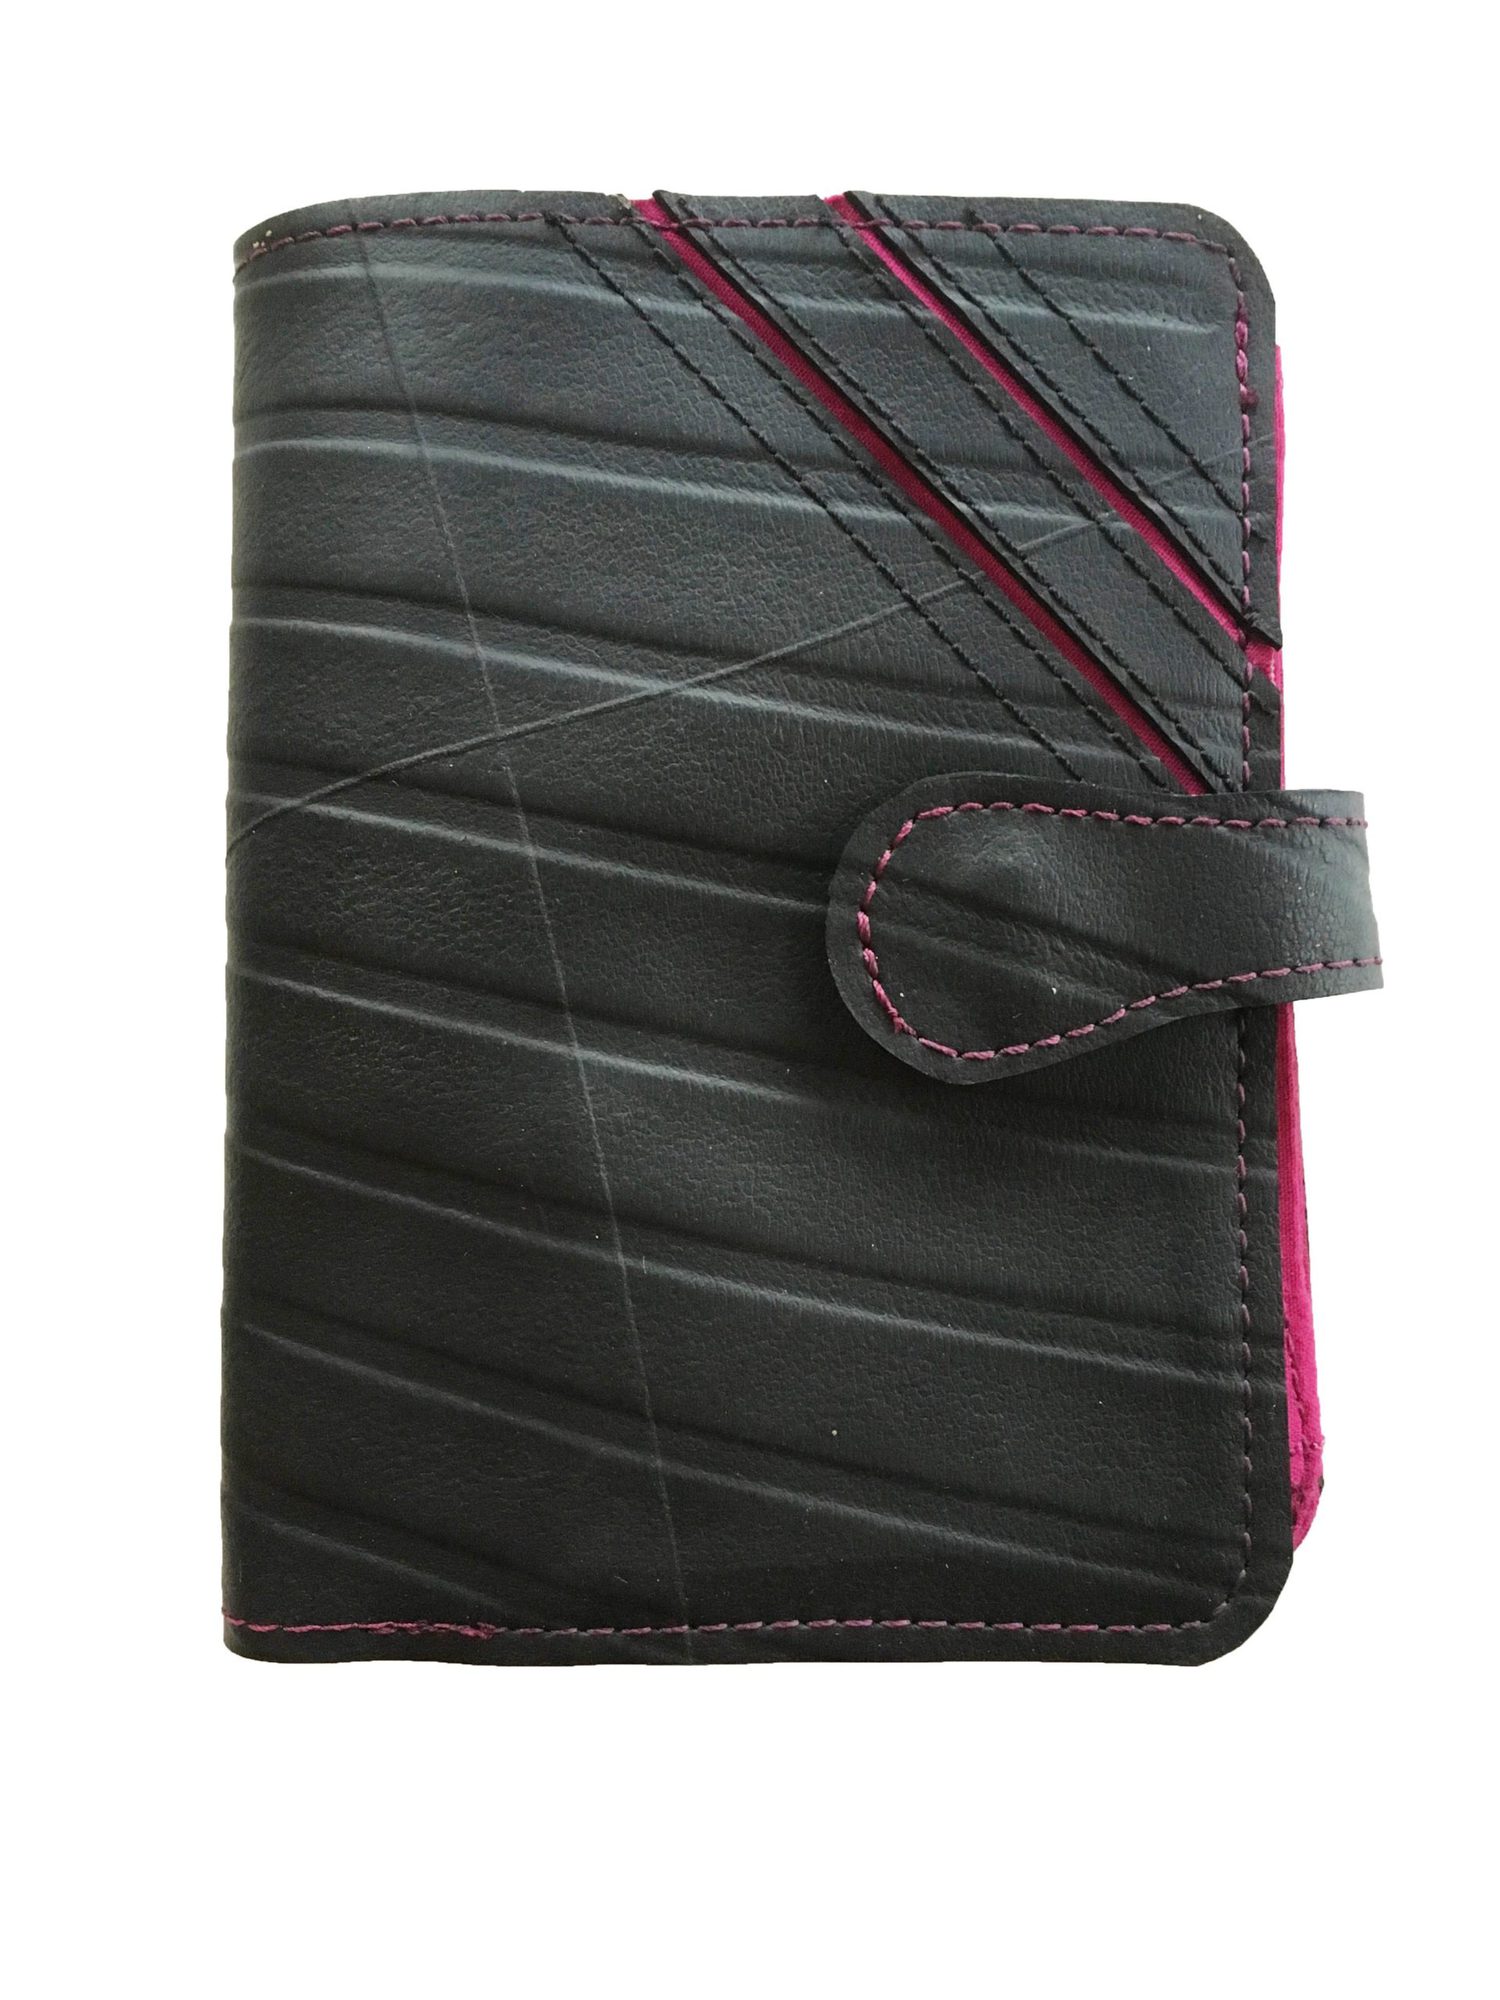 Upcycled Tyre Women’s Slim Purse